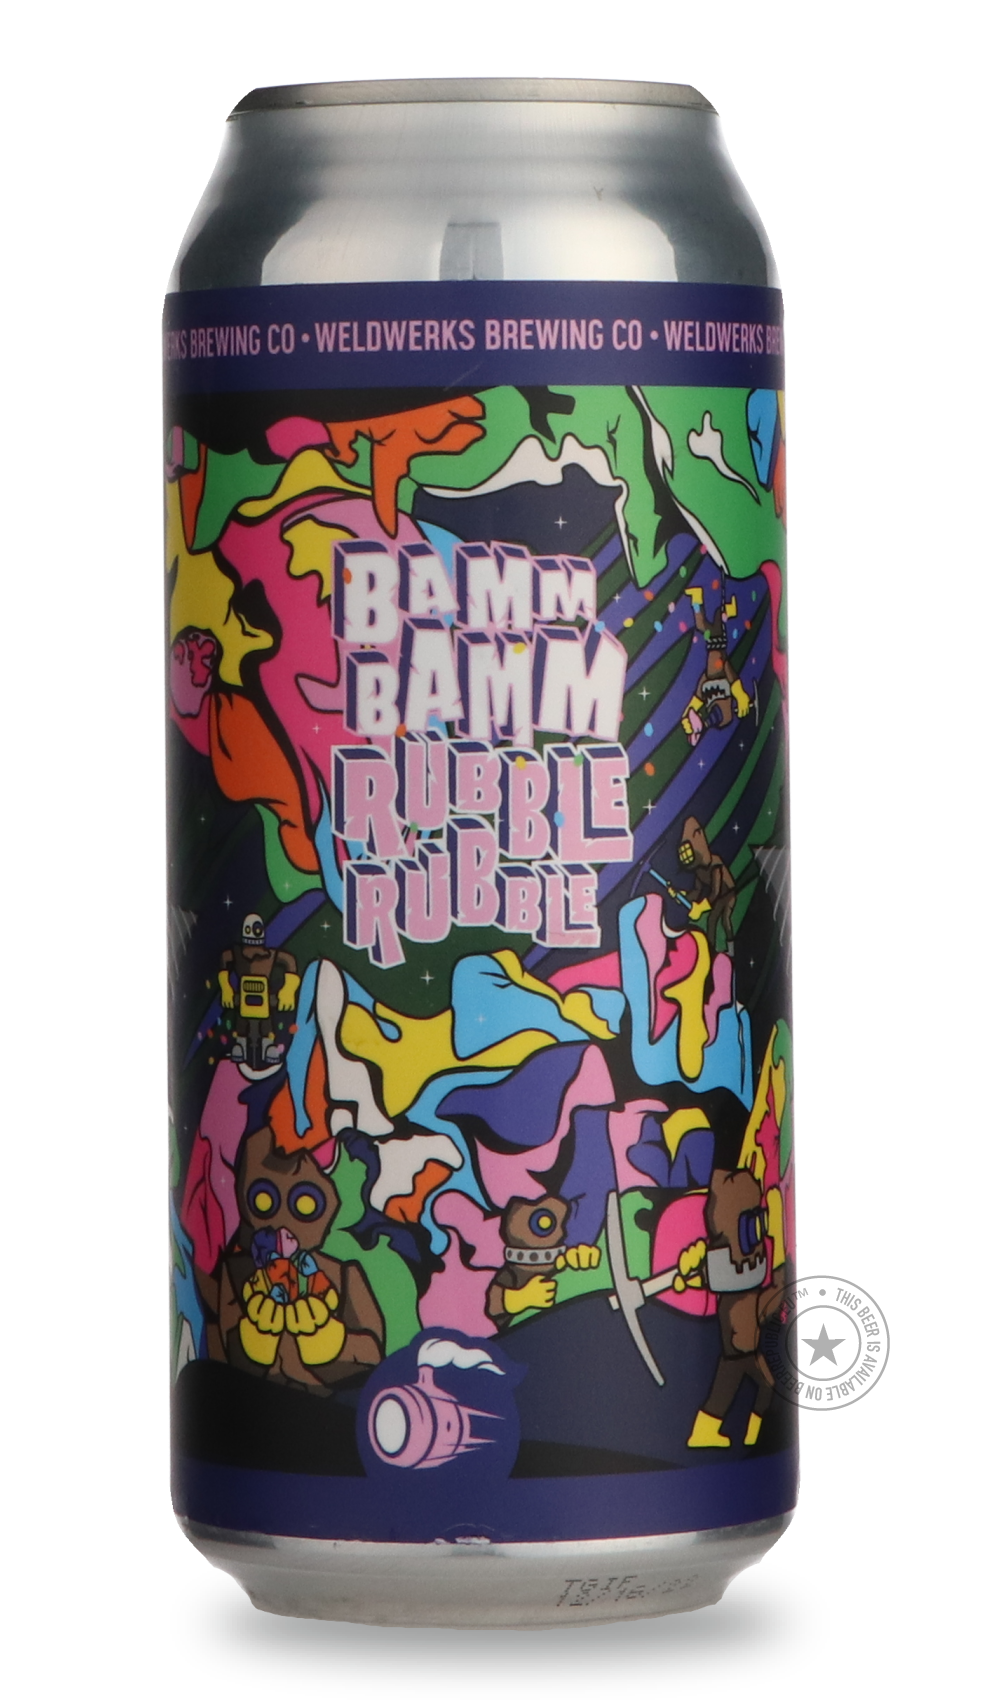 -WeldWerks- Bamm Bamm Rubble Rubble-Sour / Wild & Fruity- Only @ Beer Republic - The best online beer store for American & Canadian craft beer - Buy beer online from the USA and Canada - Bier online kopen - Amerikaans bier kopen - Craft beer store - Craft beer kopen - Amerikanisch bier kaufen - Bier online kaufen - Acheter biere online - IPA - Stout - Porter - New England IPA - Hazy IPA - Imperial Stout - Barrel Aged - Barrel Aged Imperial Stout - Brown - Dark beer - Blond - Blonde - Pilsner - Lager - Wheat